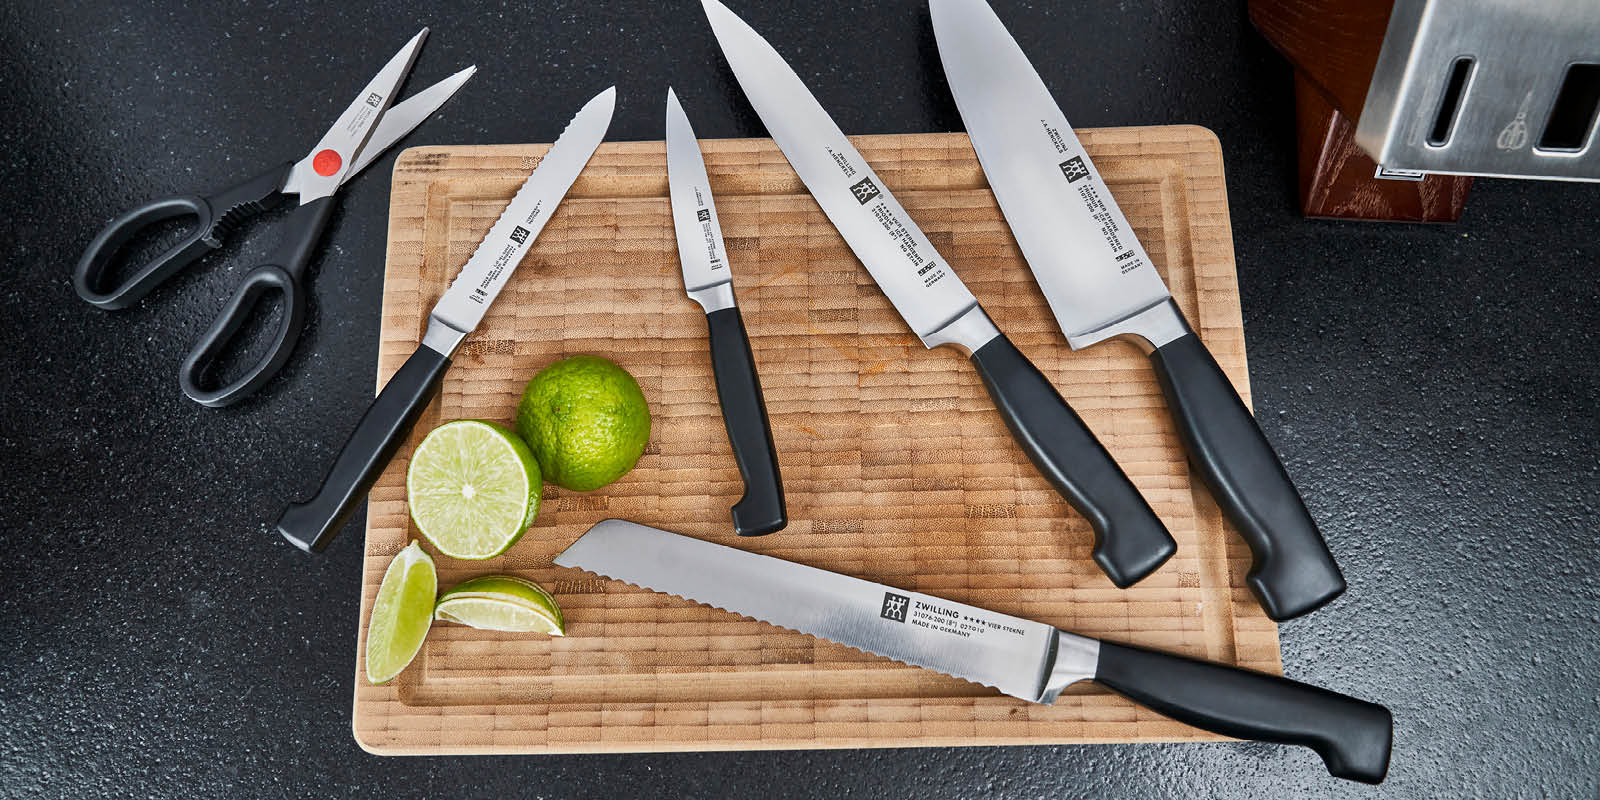 https://www.zwilling.com/on/demandware.static/-/Sites-zwilling-es-Library/default/dw5ac0ac1a/images/product-content/masonry-content/zwilling/cutlery/four-star/35145-000-0_Lifestyle_Image_Series_OS_1200x600.jpg